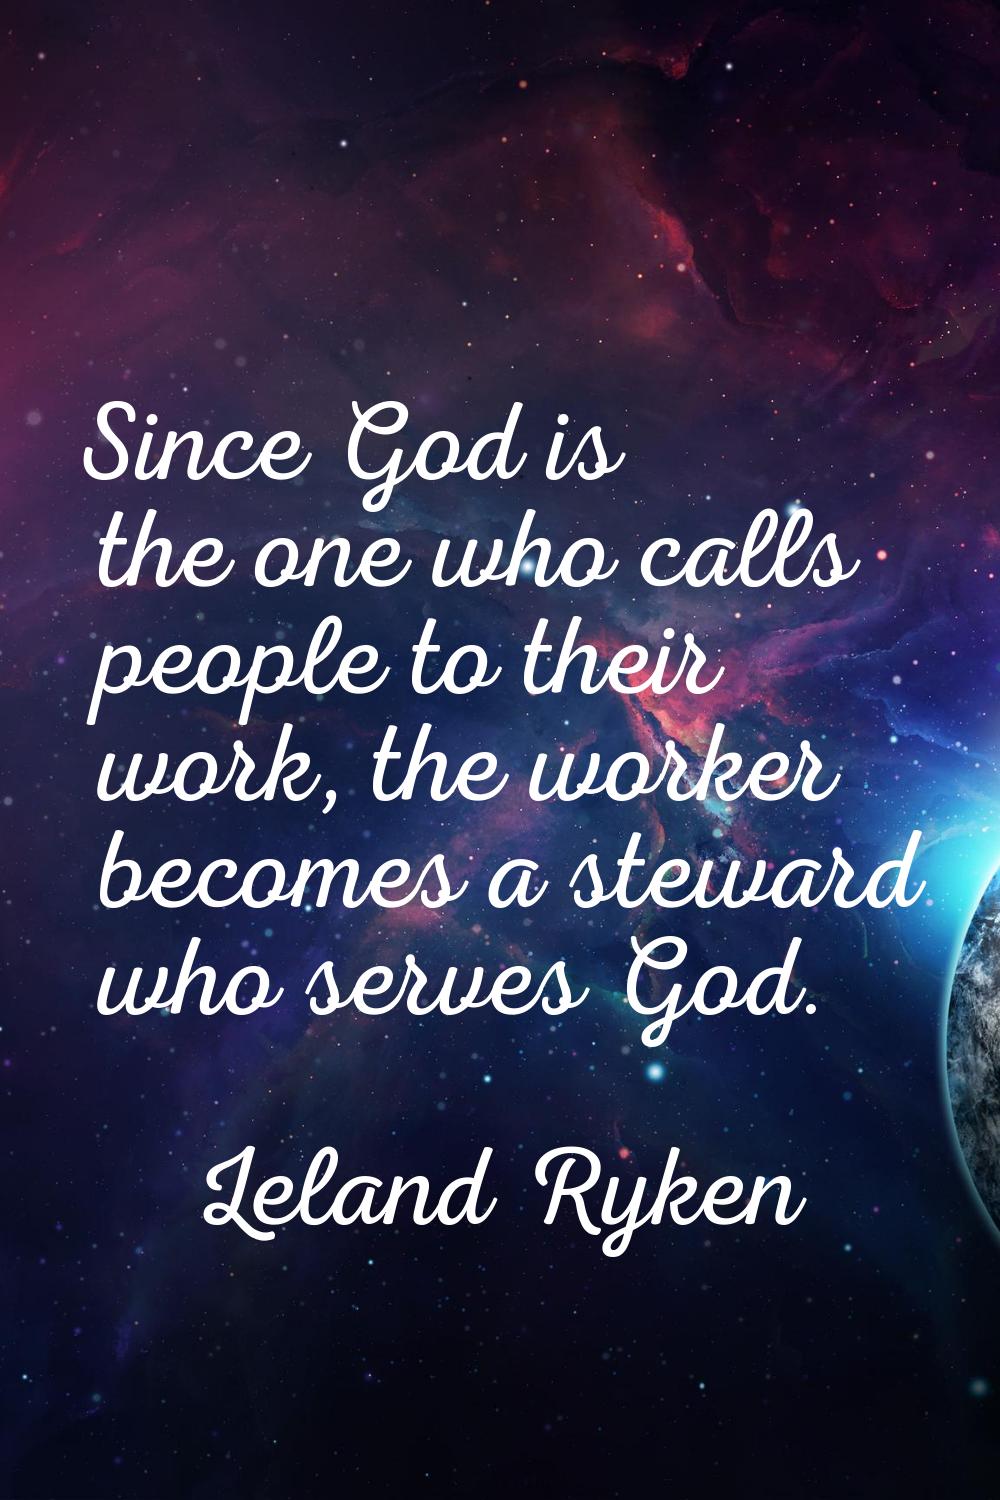 Since God is the one who calls people to their work, the worker becomes a steward who serves God.